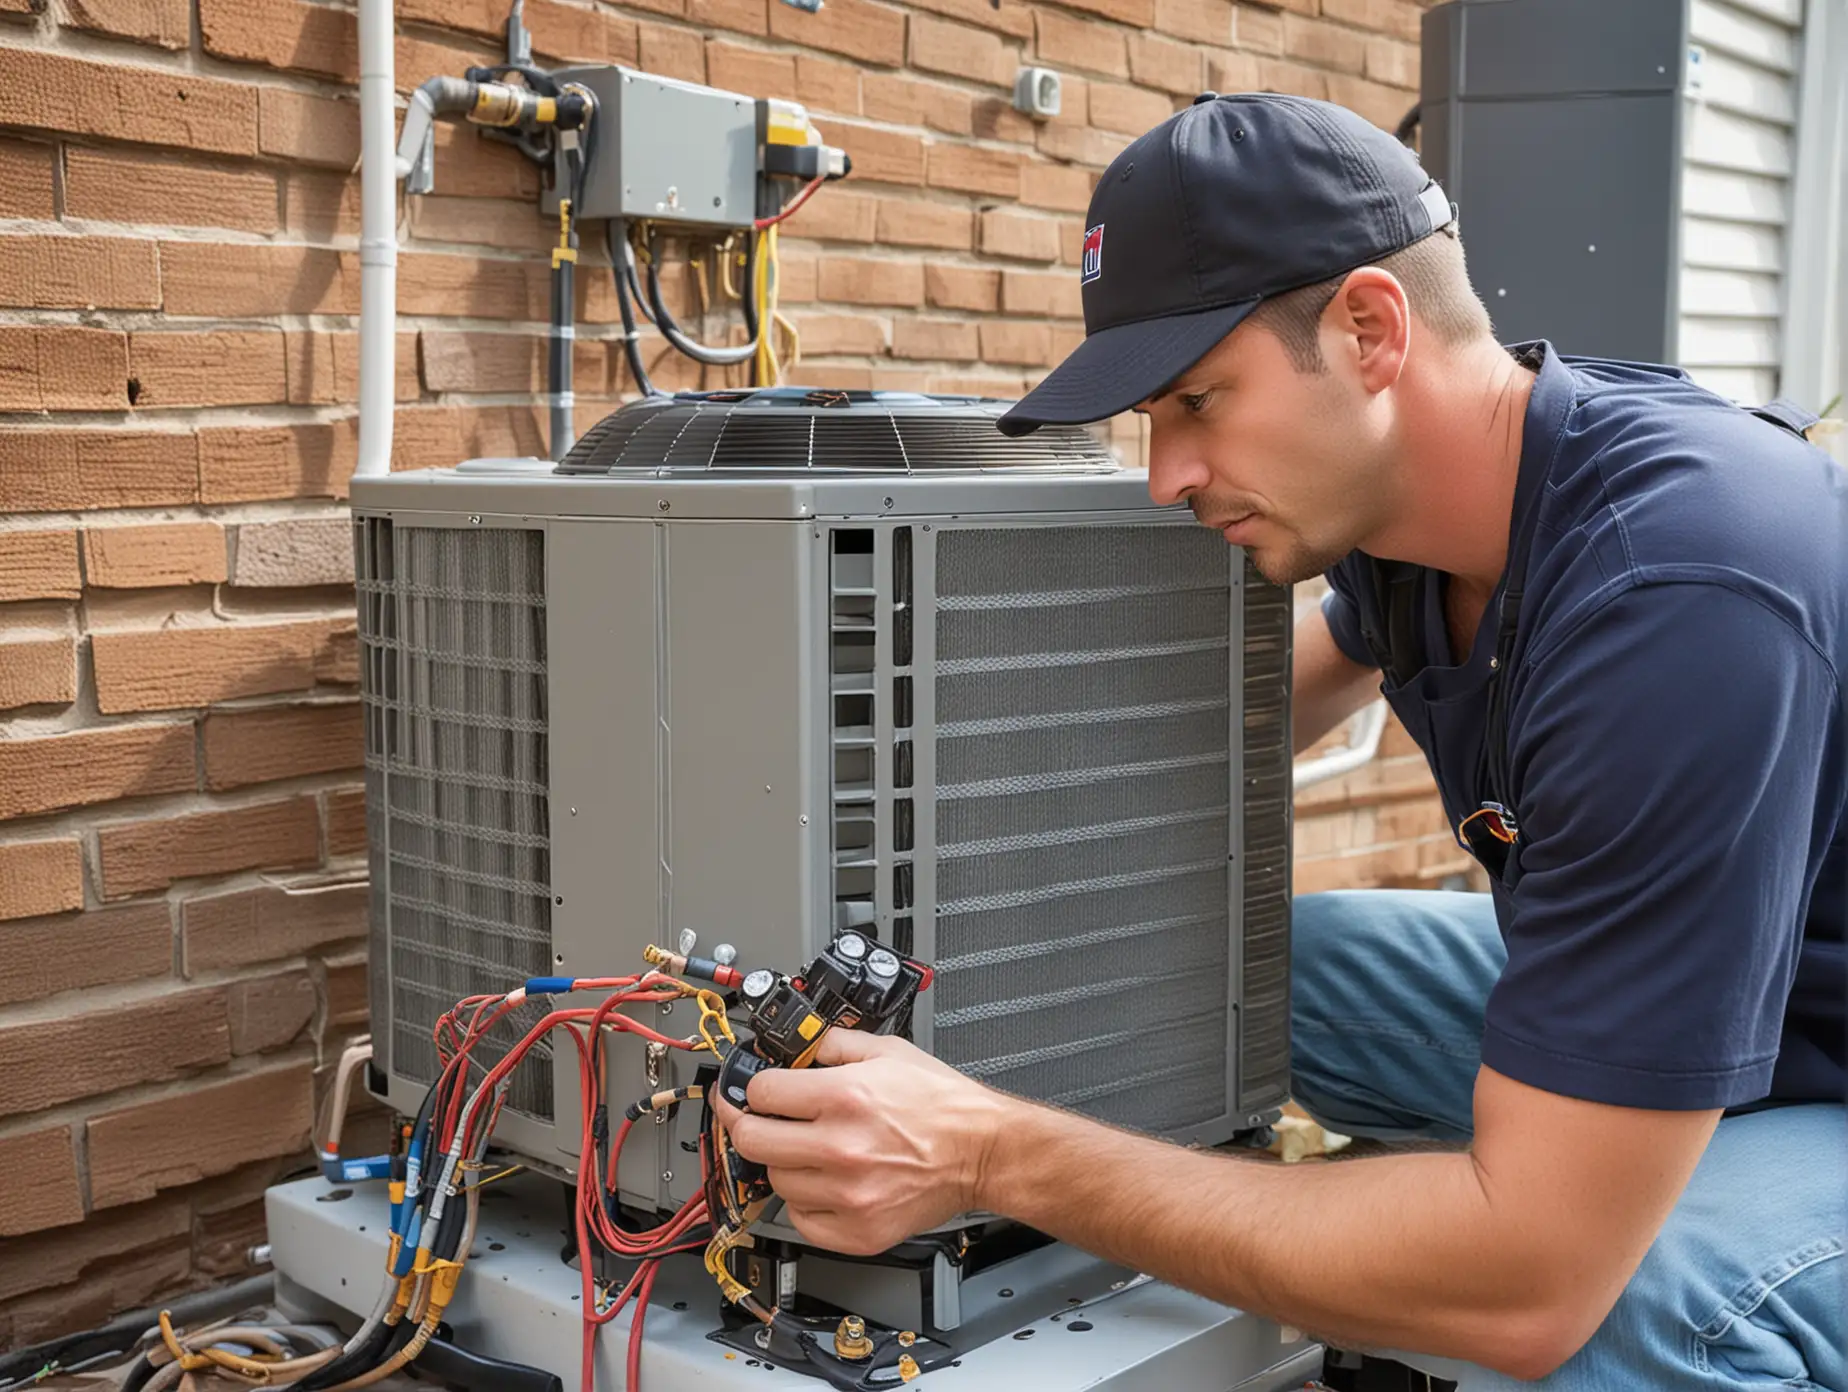 Create an image of a professional American hvac technician from north Georgia installing or working on an HVAC unit at a customers home.
